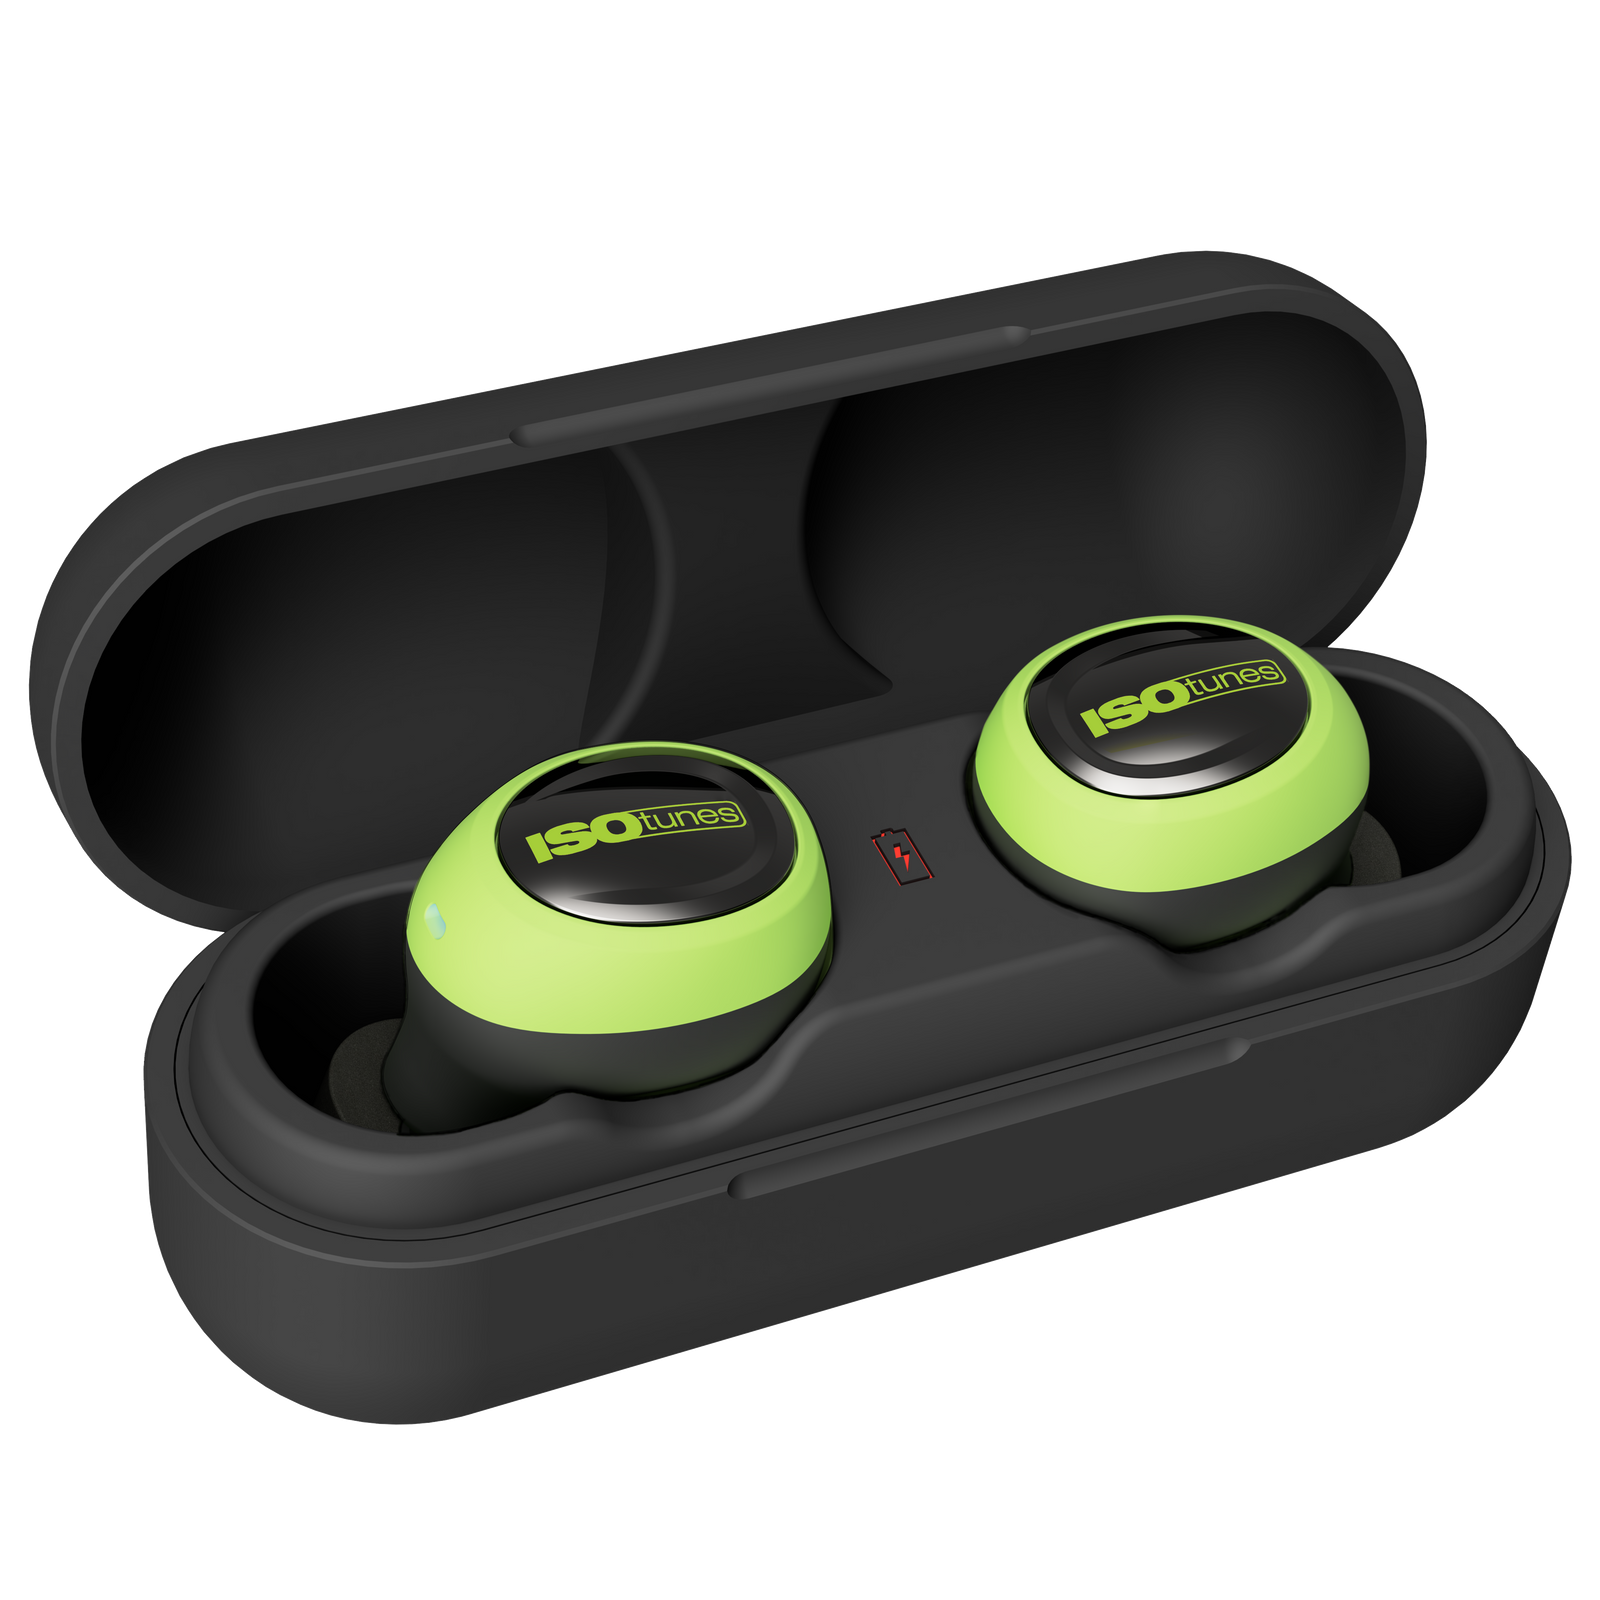 ISOtunes FREE 2 Wireless Earbuds with All-Day Battery Life